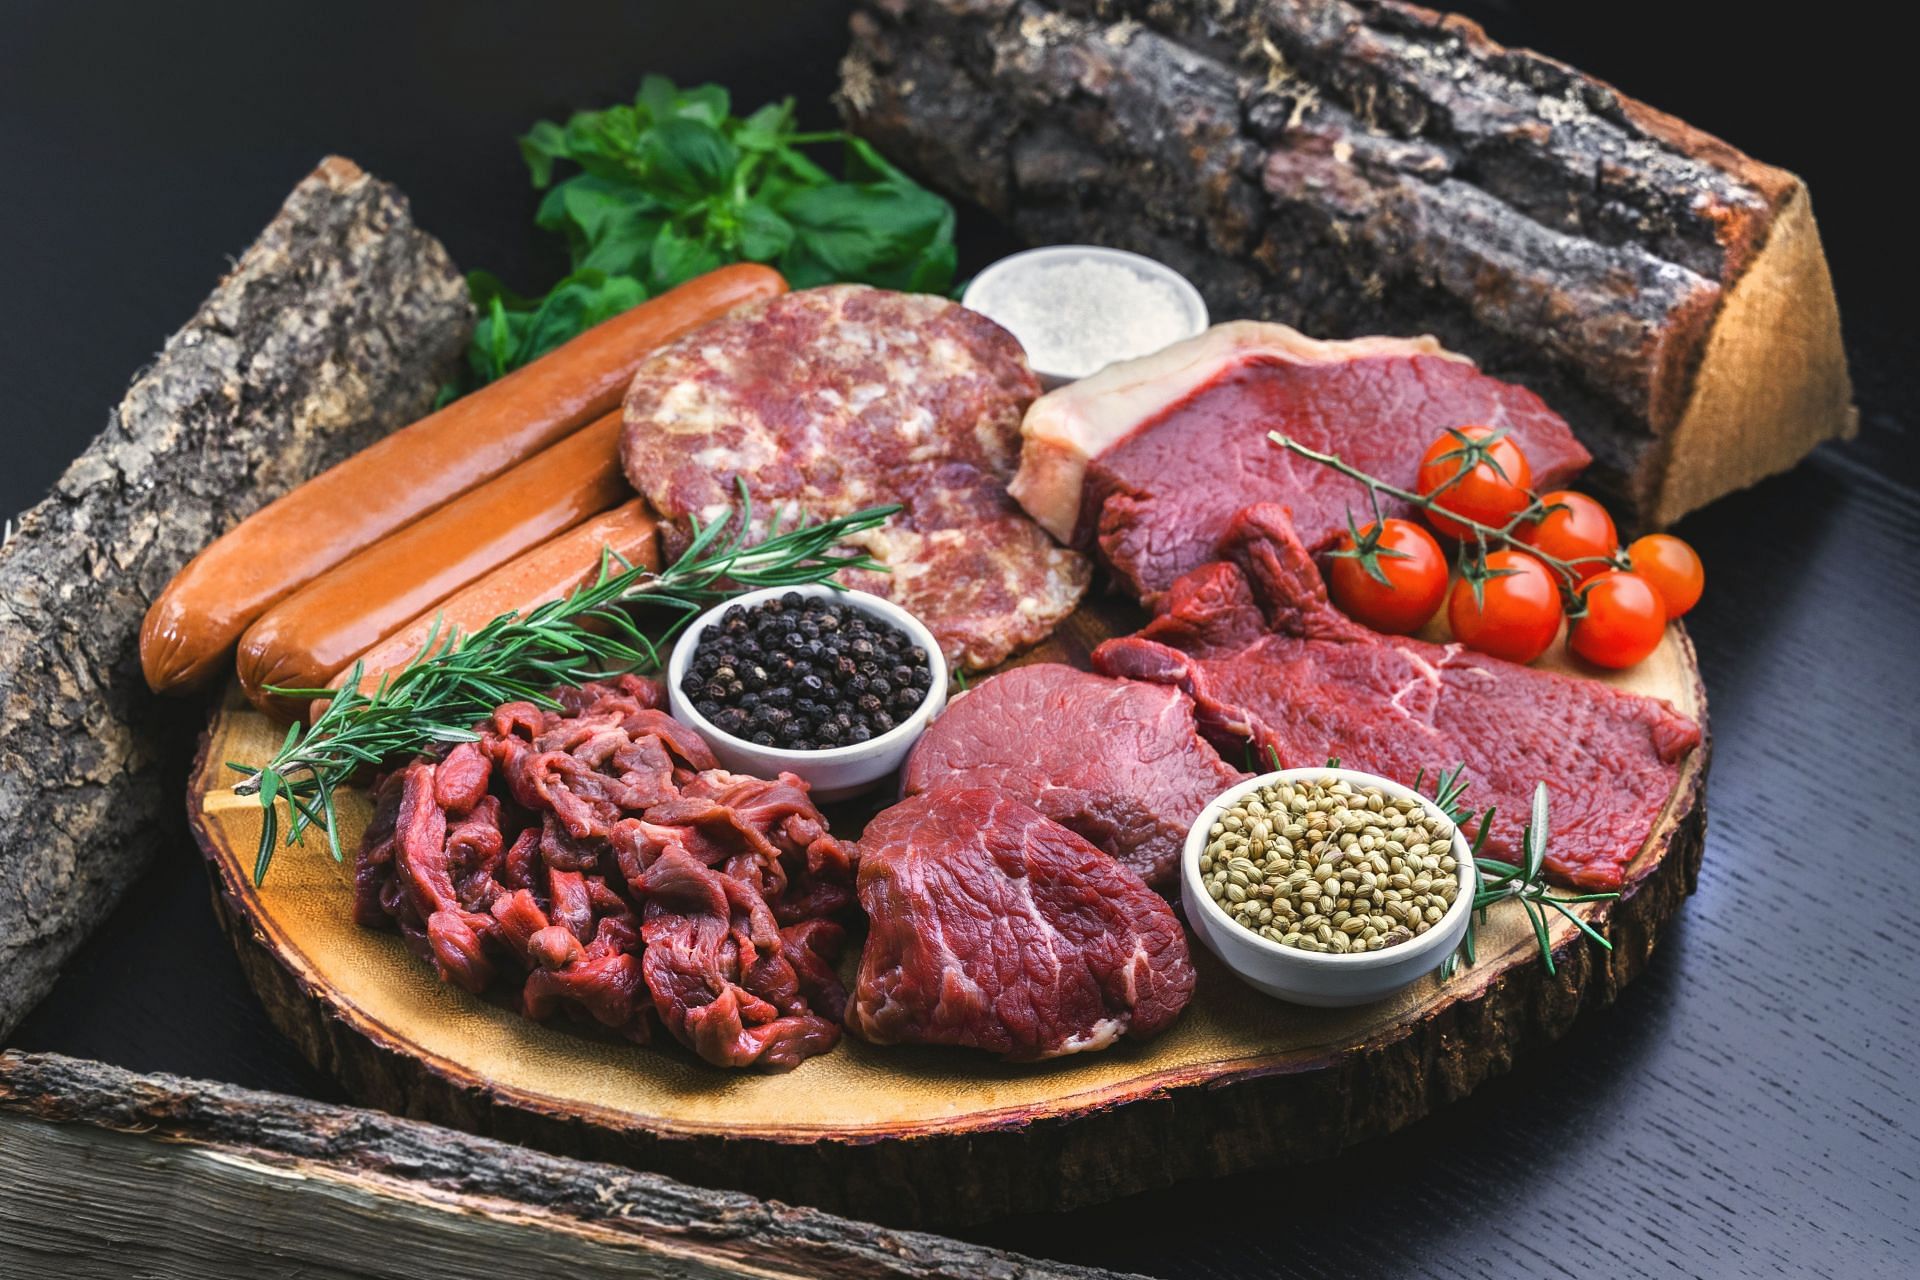 Red meat and processed meats are discouraged in the Okinawa diet, (Image via Unsplash/Eiliv Aceron)